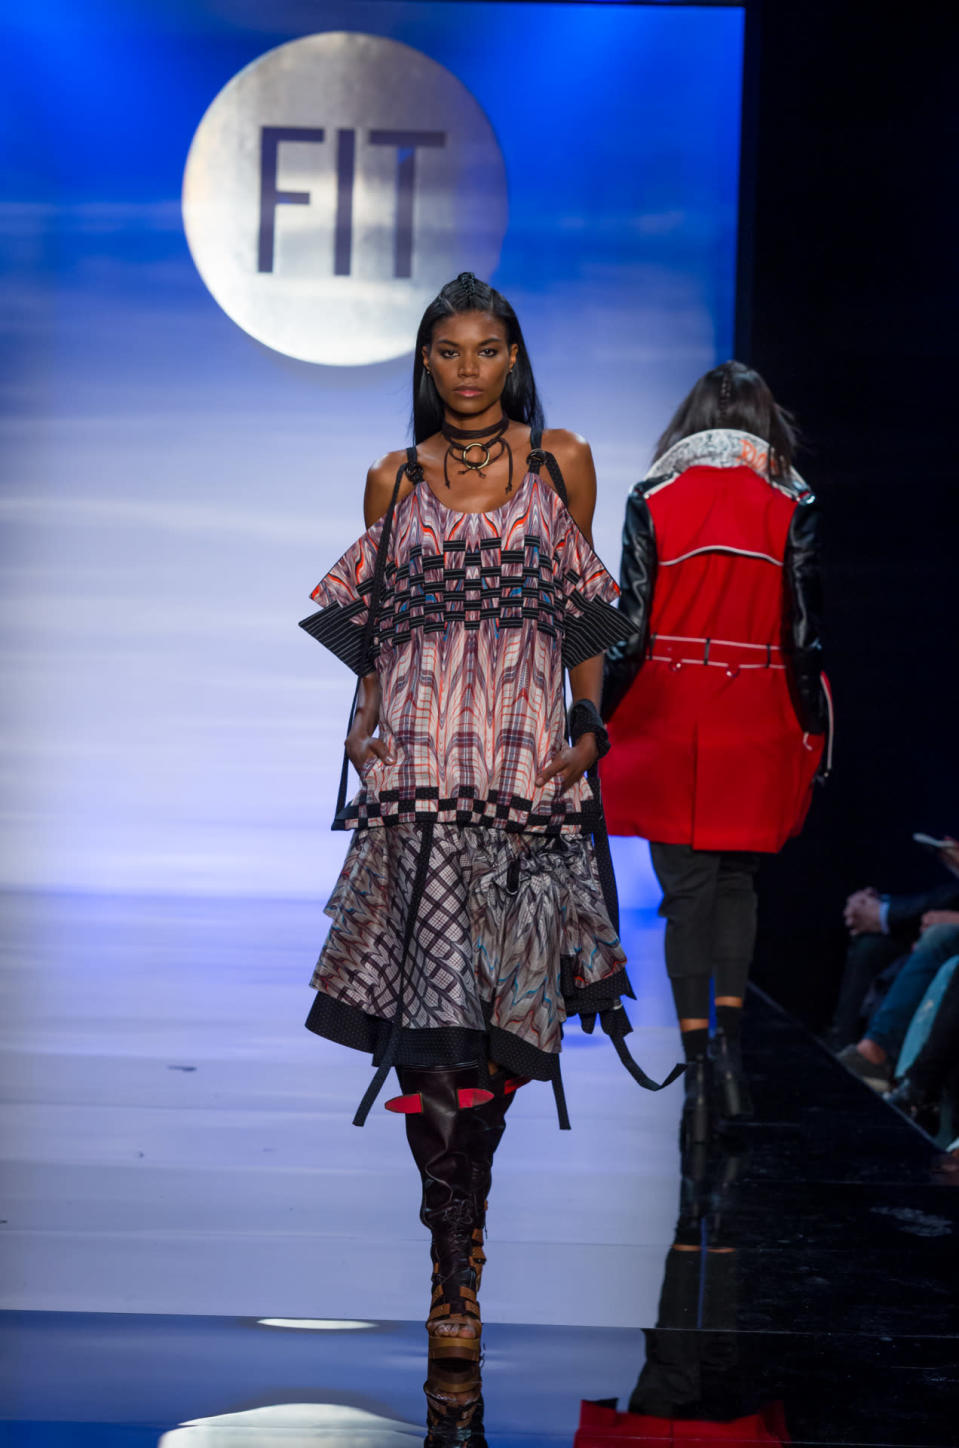 FIT graduate Aaron Rose’s dress offered a trippy, optical plaid that’s the coolest take on that print since Marc Jacobs did grunge for Perry Ellis.